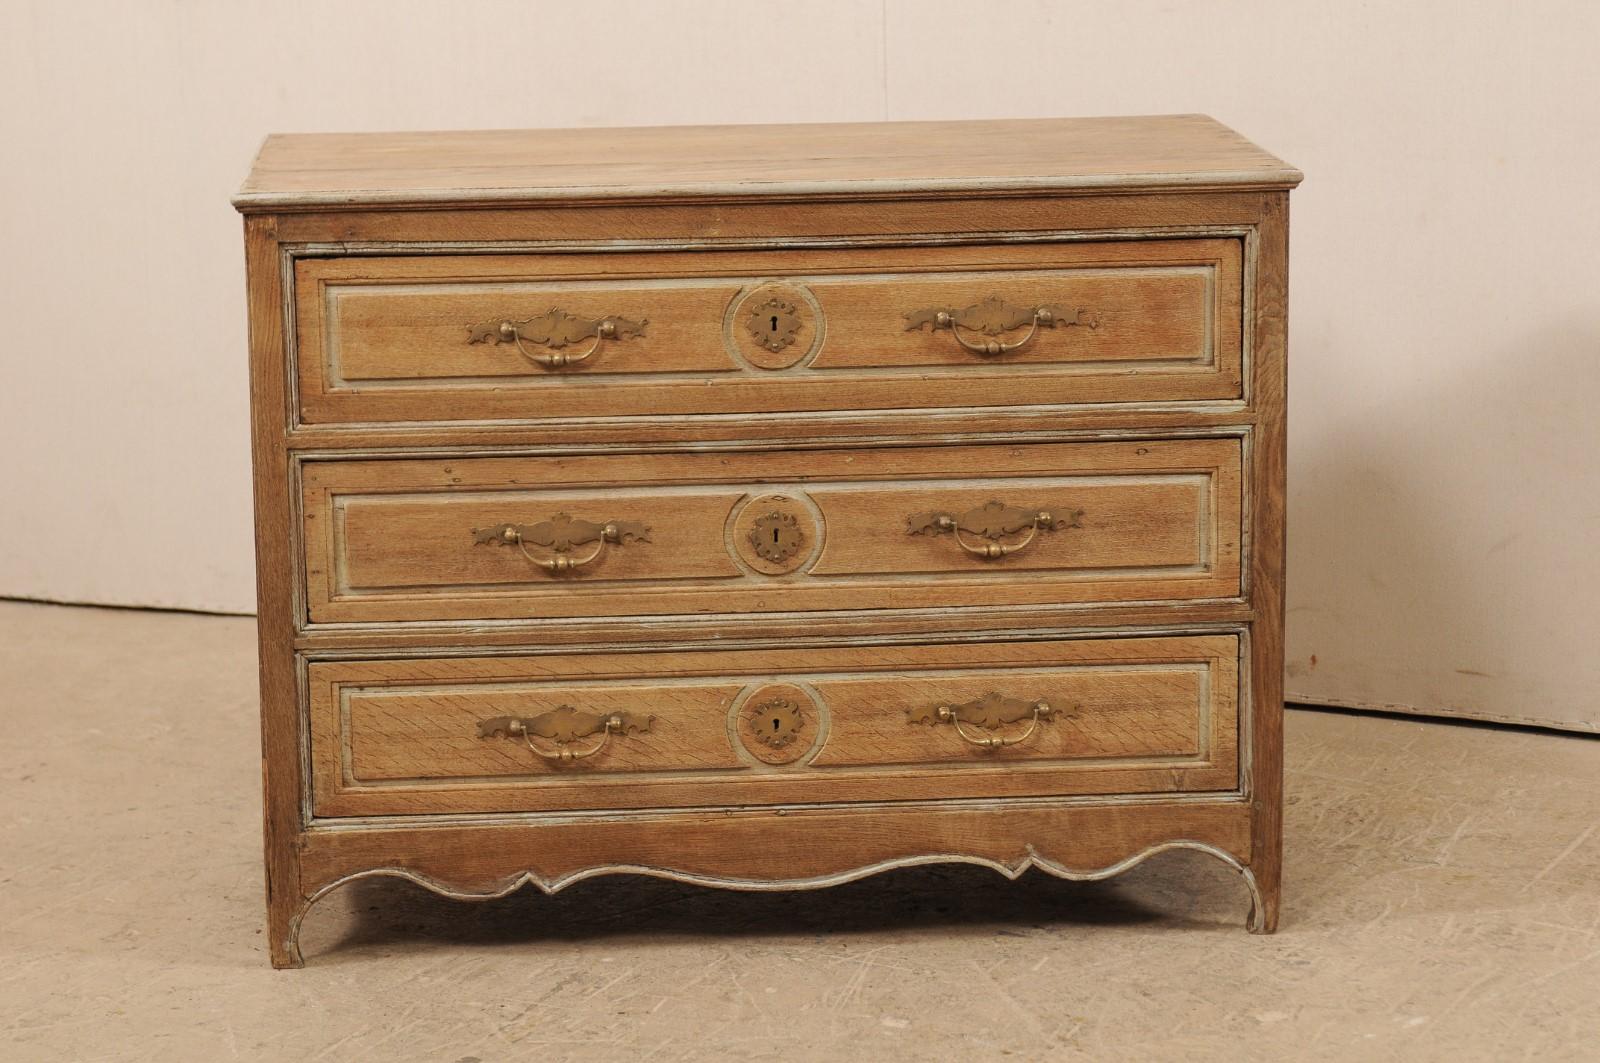 19th Century French Wood Chest of Drawers with Wonderfully Scalloped Skirt (Französisch)